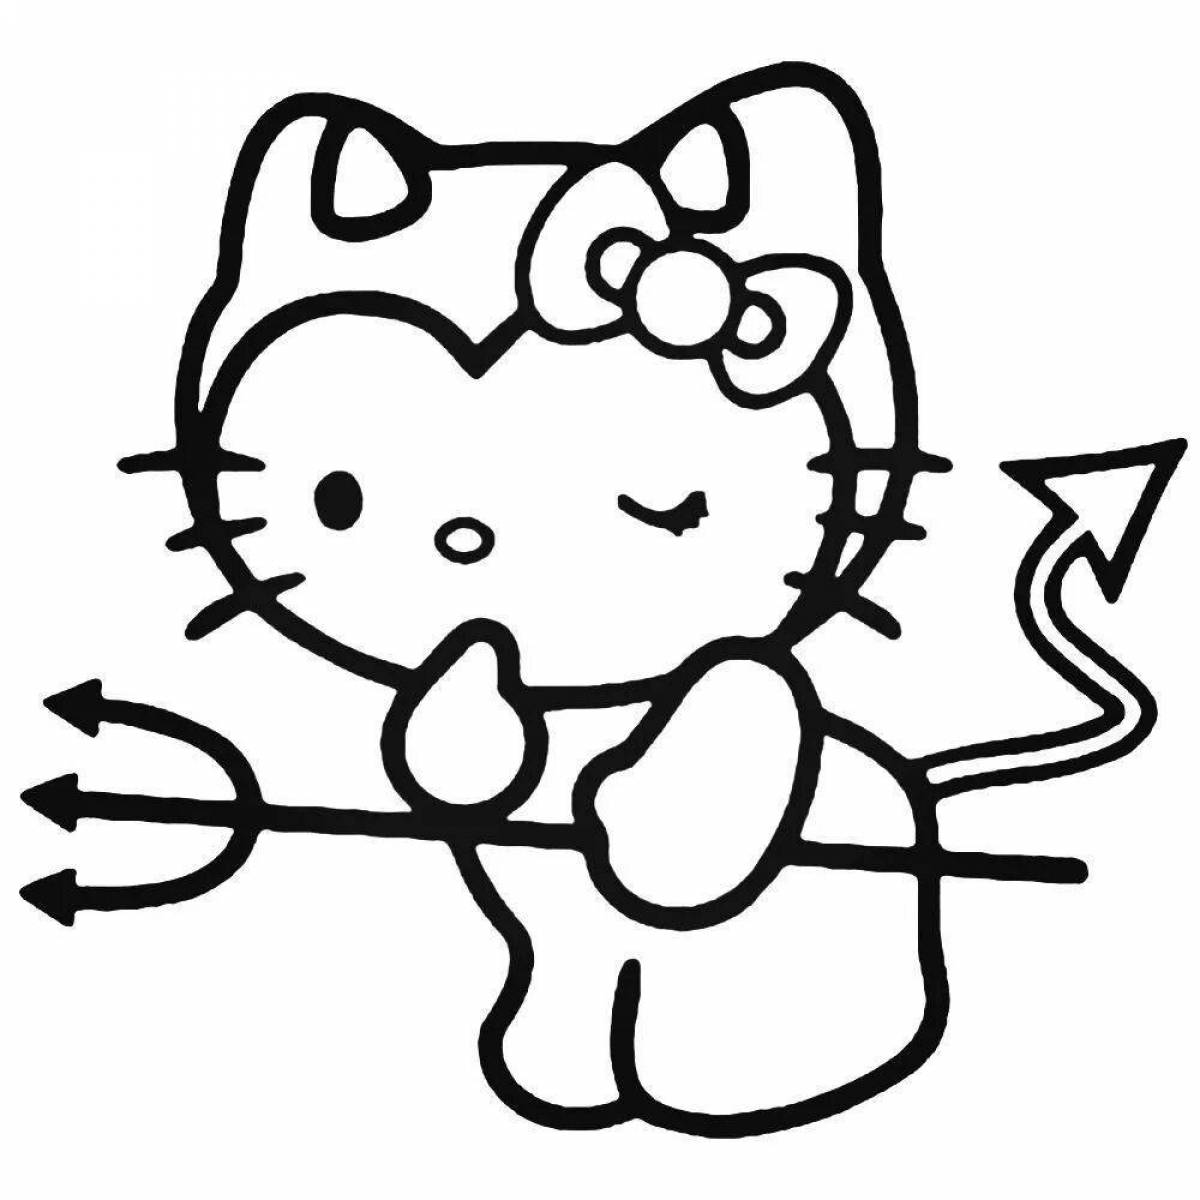 Coloring book hello kitty magic stickers